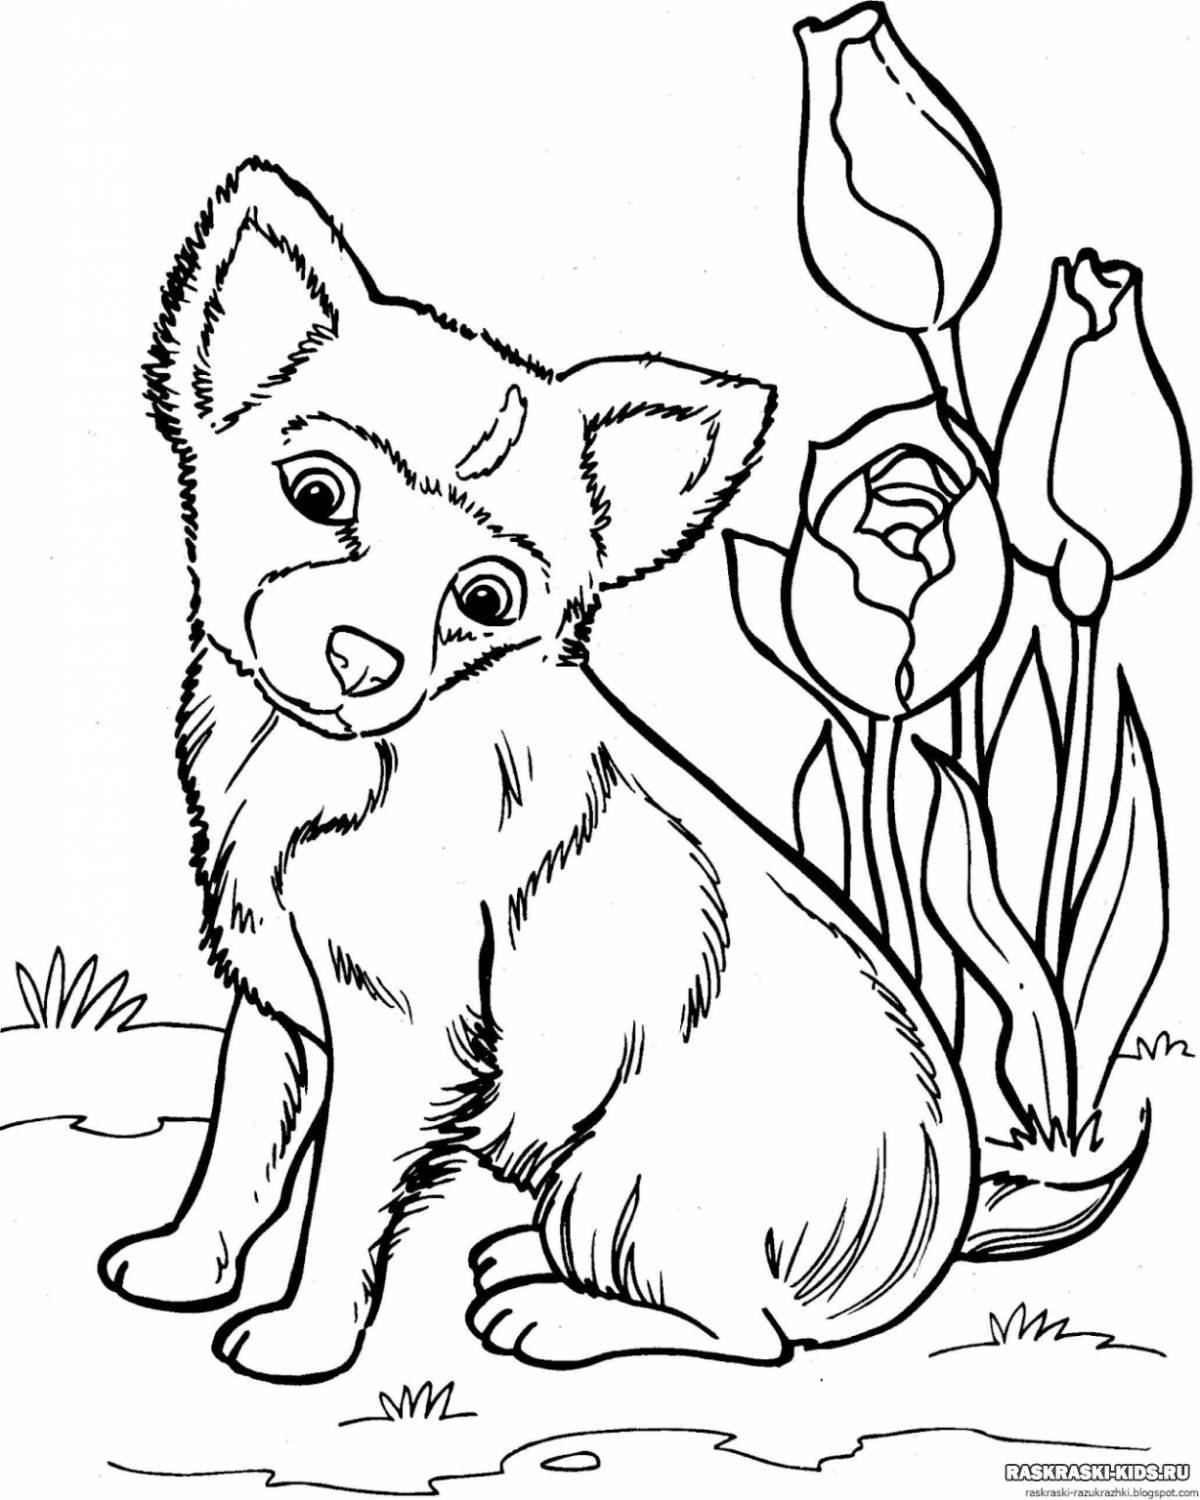 Joyful coloring for girls 8 years old animals